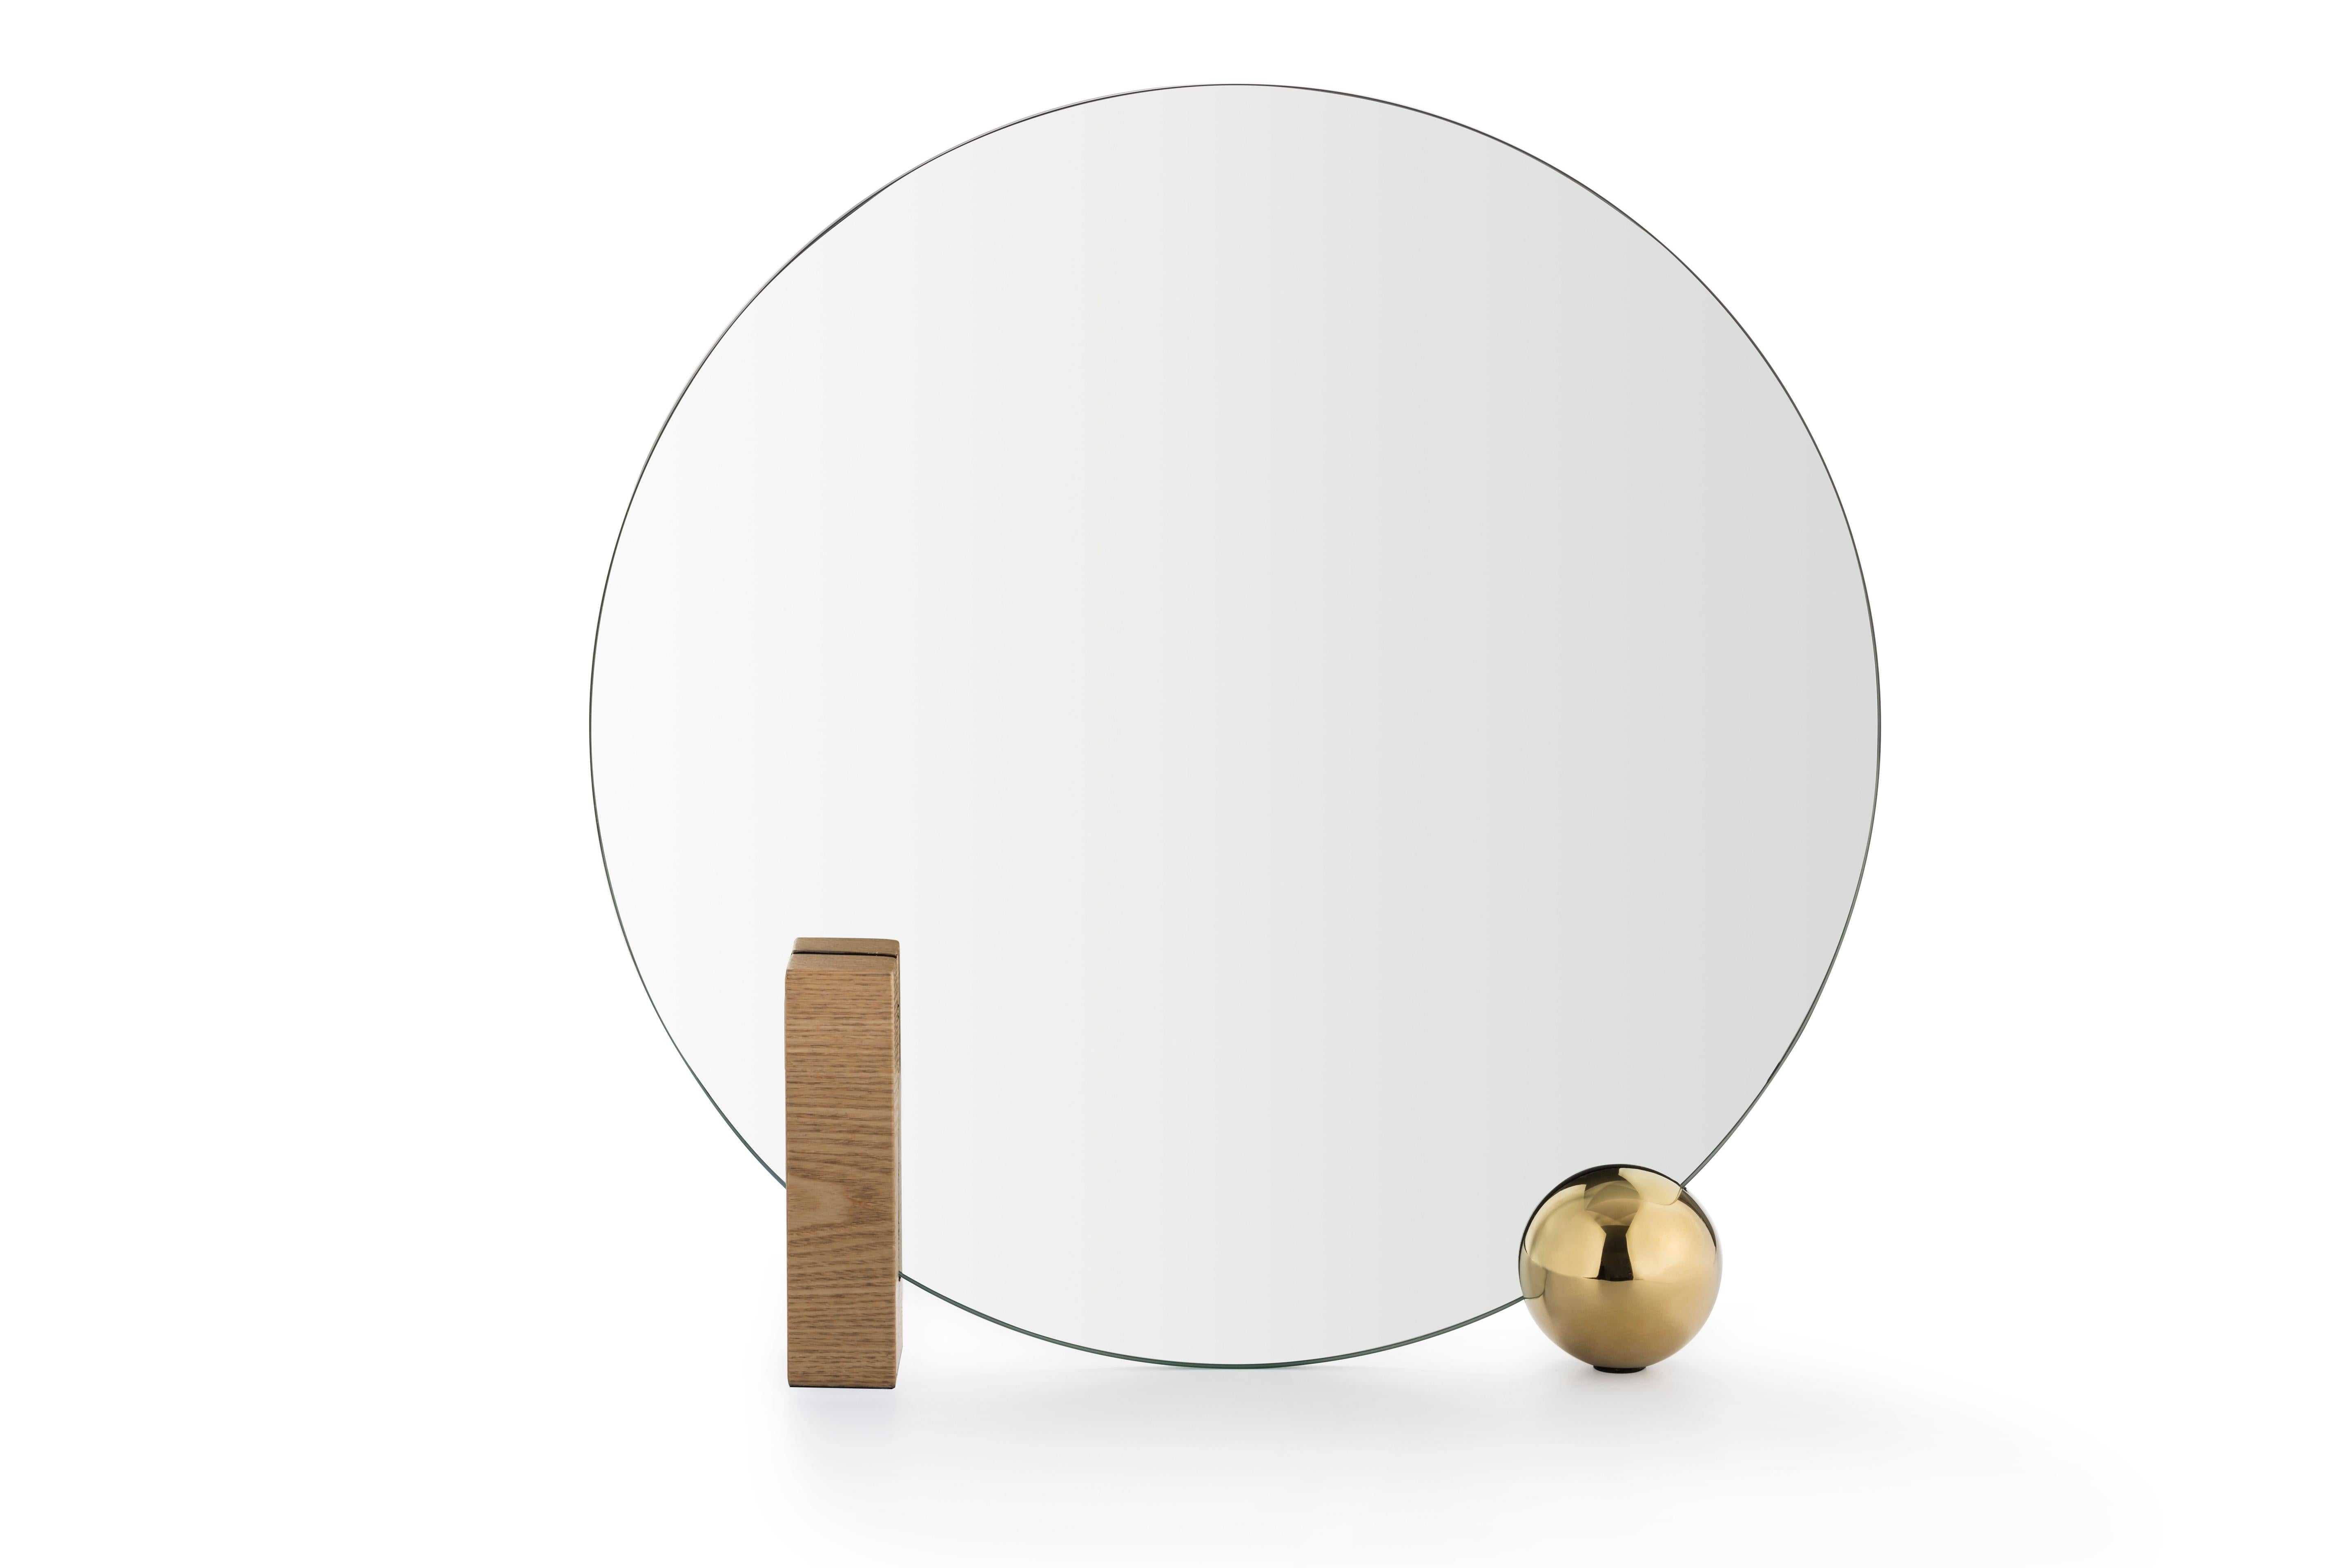 Design by WUU
Table mirror Measures: W 50 x D 9 x H 50 cm
Rectangular block in ash veneer painted metal or green marble
Round ball – plated metal coated with glossy gold finish
Back mirror in colored-stained ash veneer, celadon color
Clear